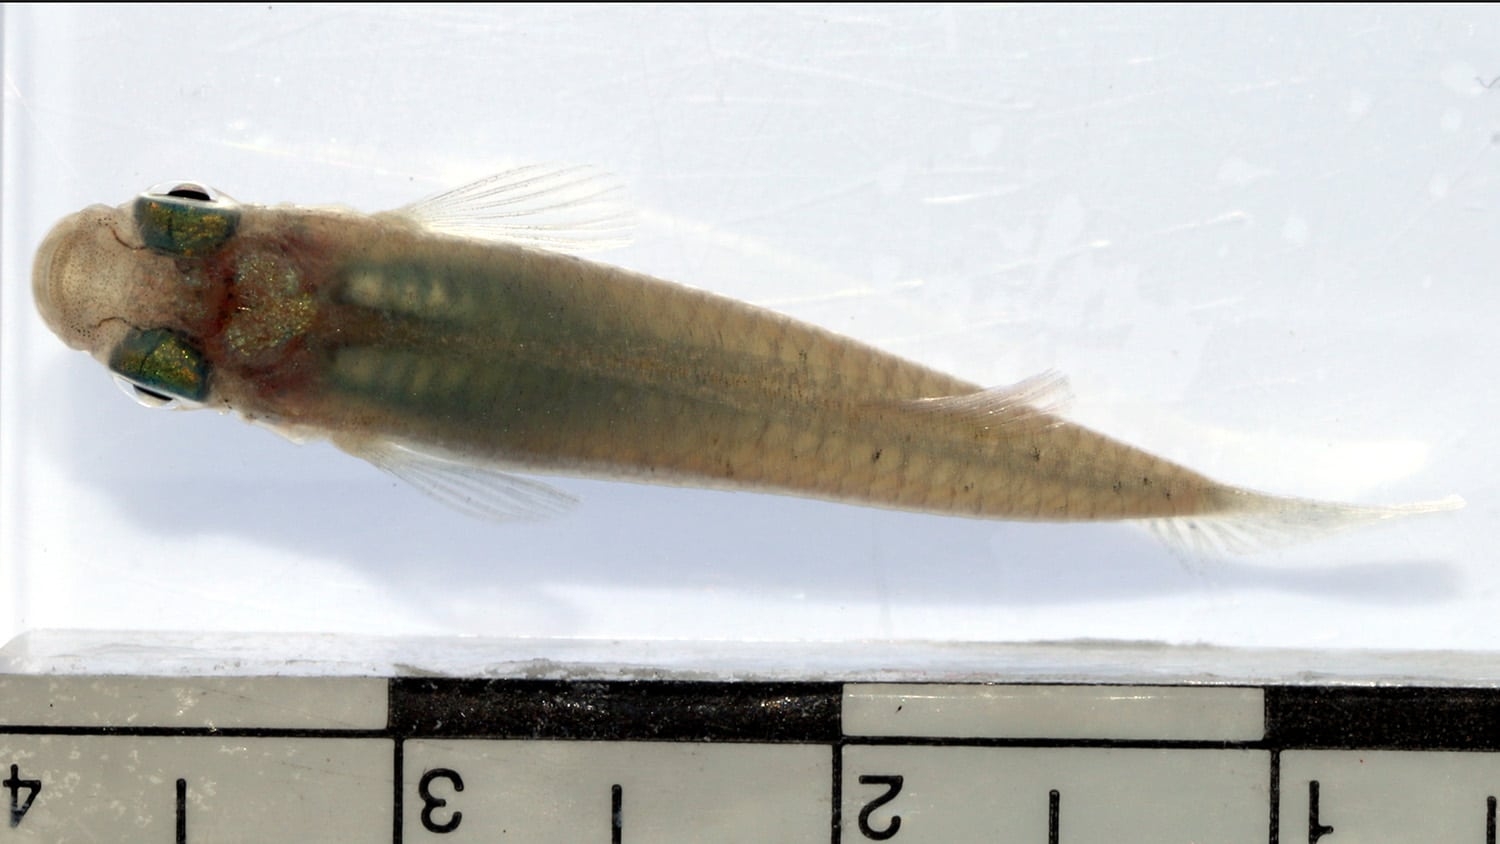 mosquitofish - Human-Driven Habitat Change Leads to Physical, Behavioral Change in Mosquitofish - Forestry and Environmental Resources Department at NC State